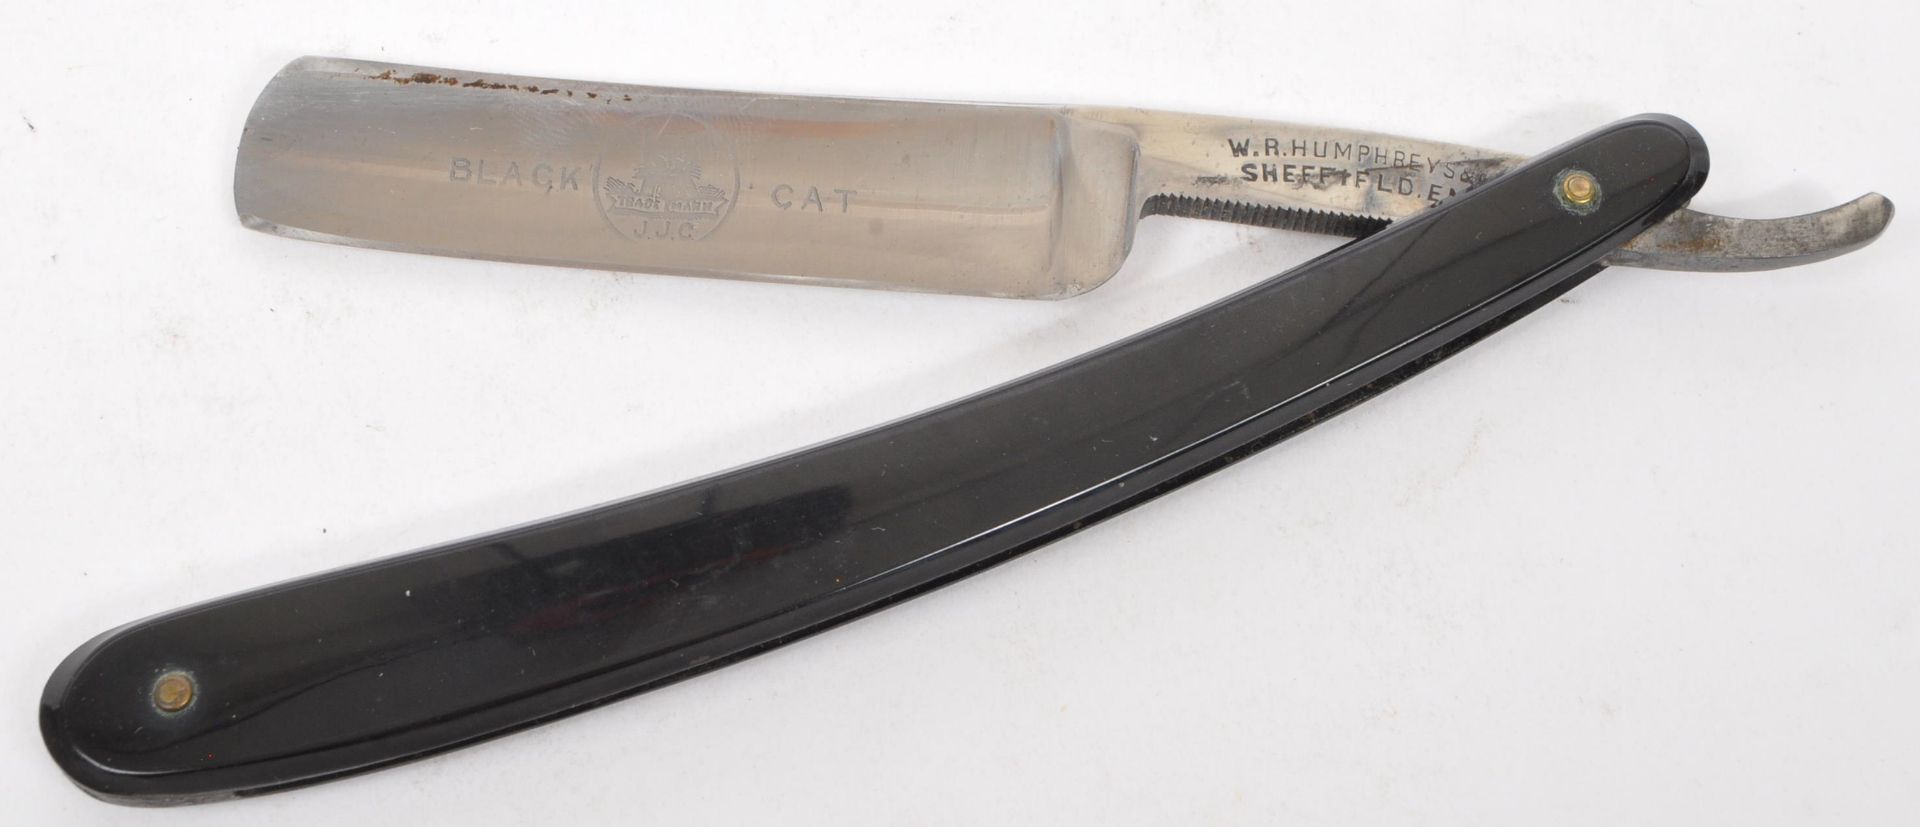 COLLECTION OF EARLY TO MID 20TH CENTURY CUT THROAT RAZORS - Image 4 of 5